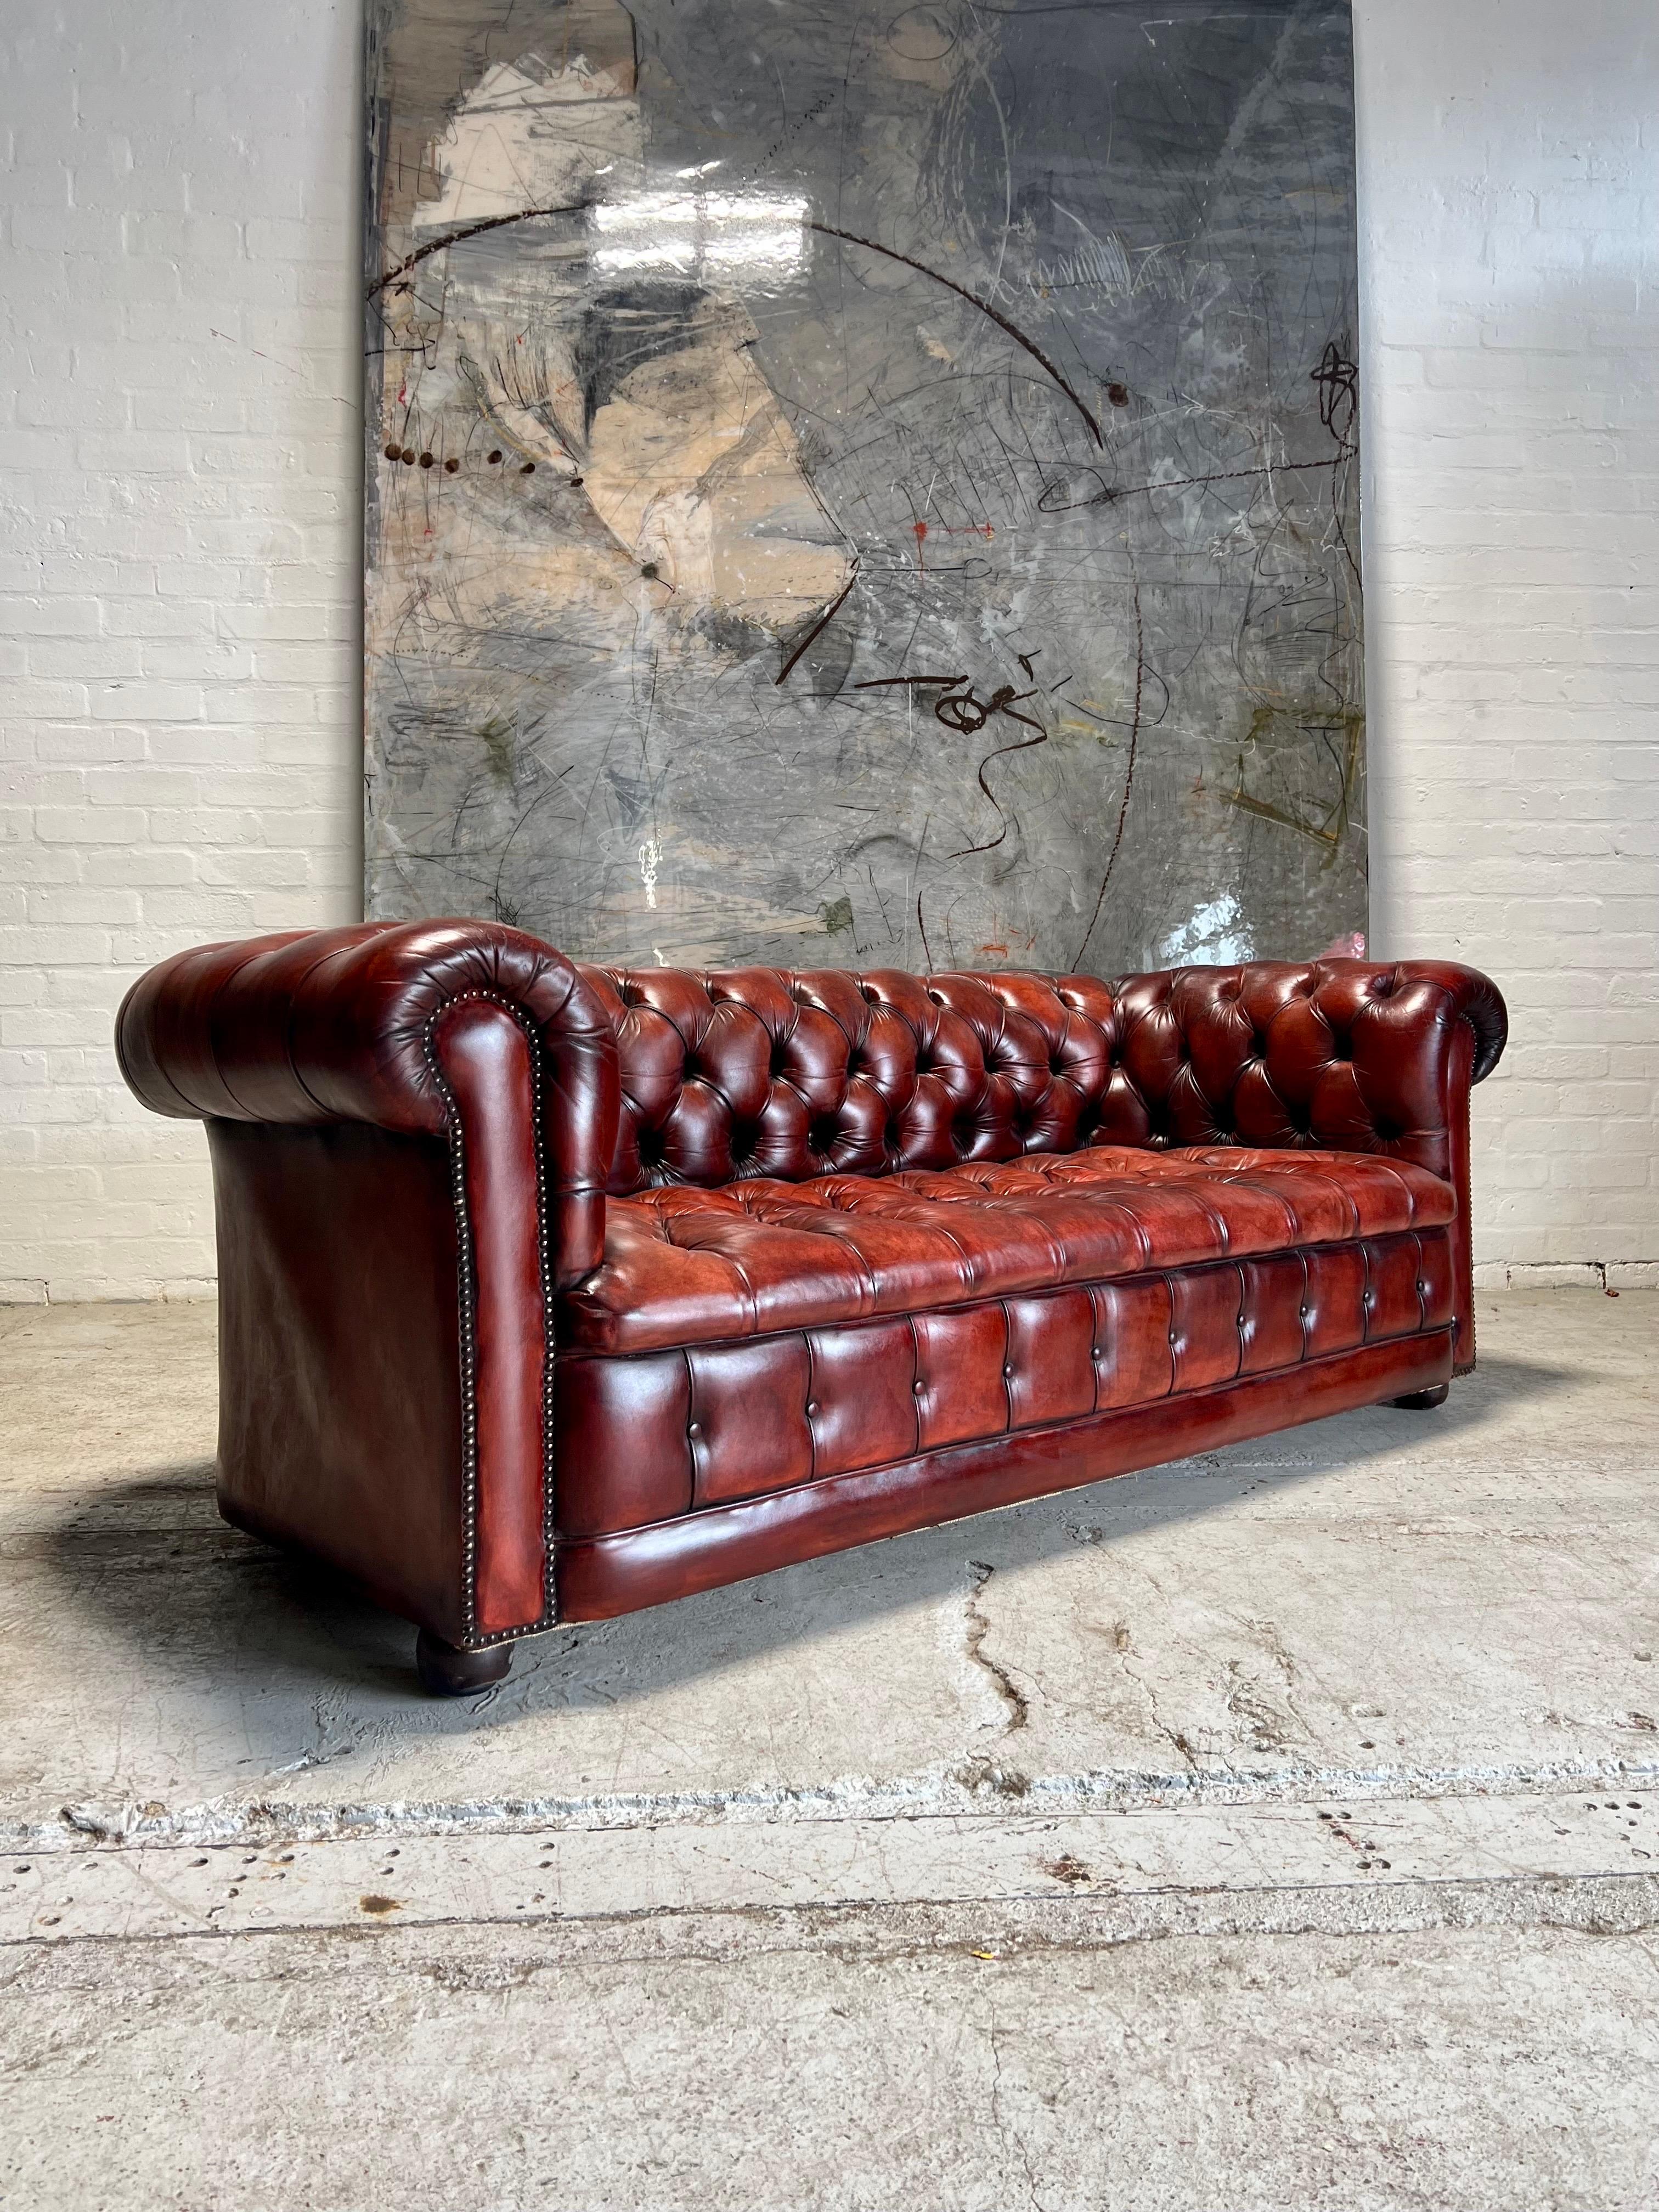 A true focal point of any room.  The very distinctive colouring of the leathers on this piece are certain to creat a conversation.  A very positive conversation!

The natural patina is nothing short of exquisite and condition excellent.

Built with